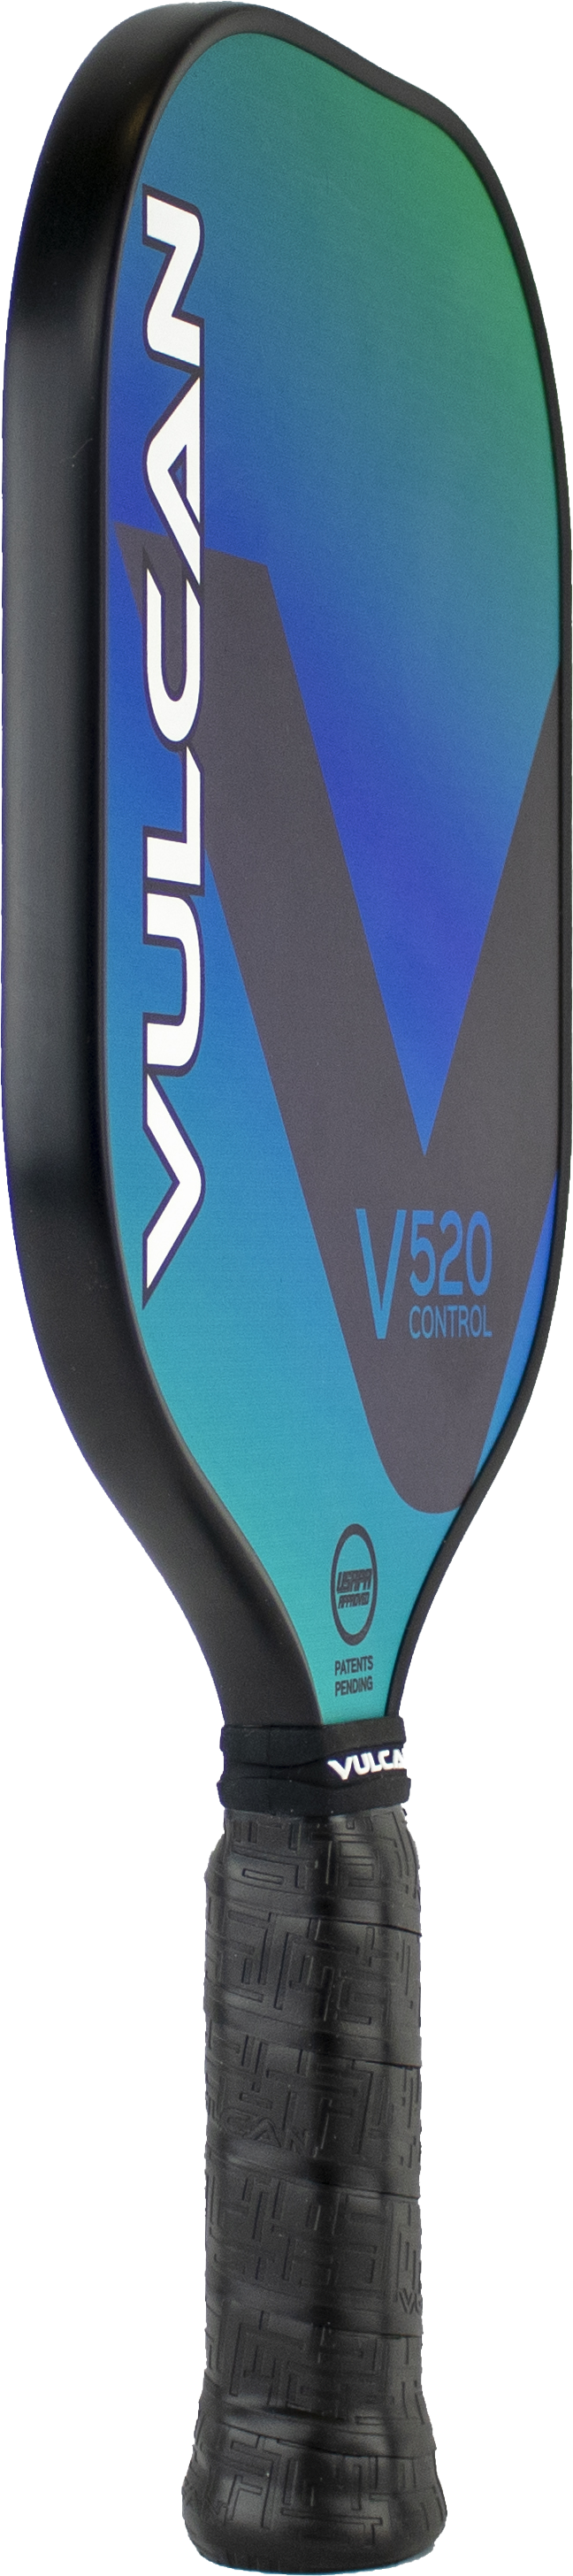 The Vulcan V520 Control pickleball paddle is shown on a white background.